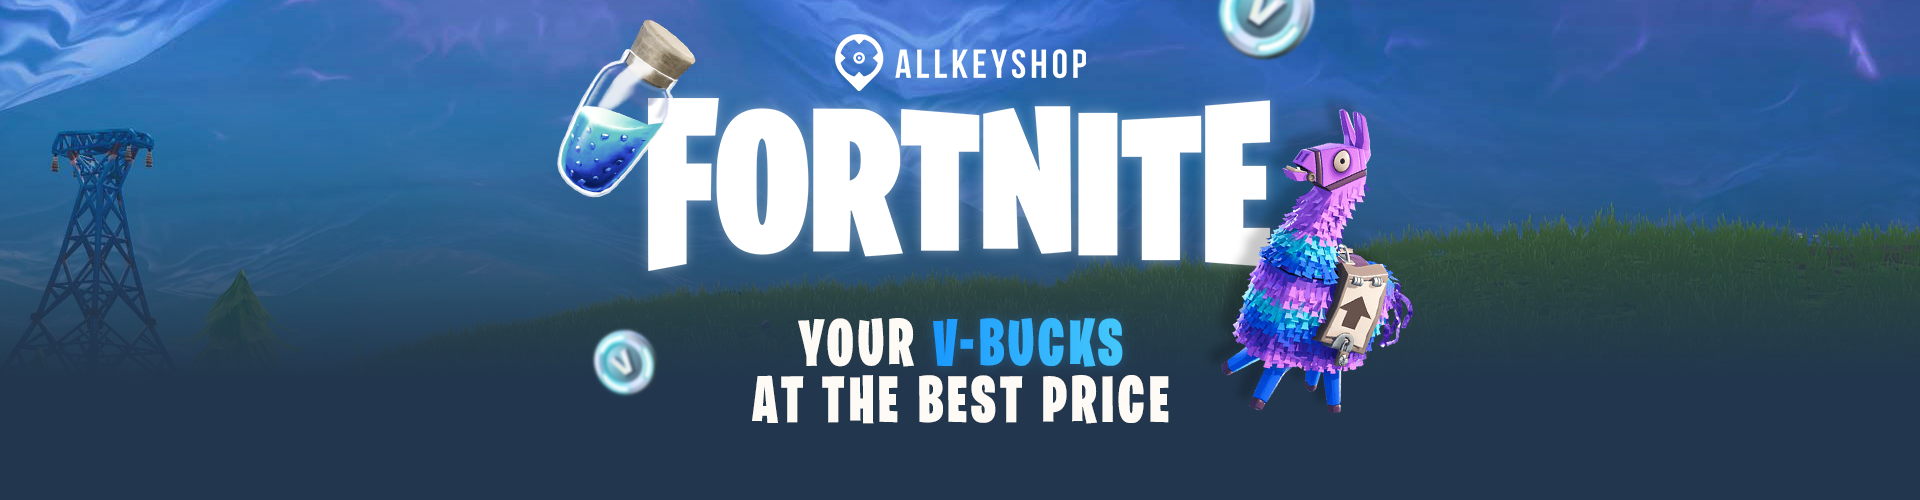 Get V-Bucks in Fortnite: The Essential Buyer's Guide